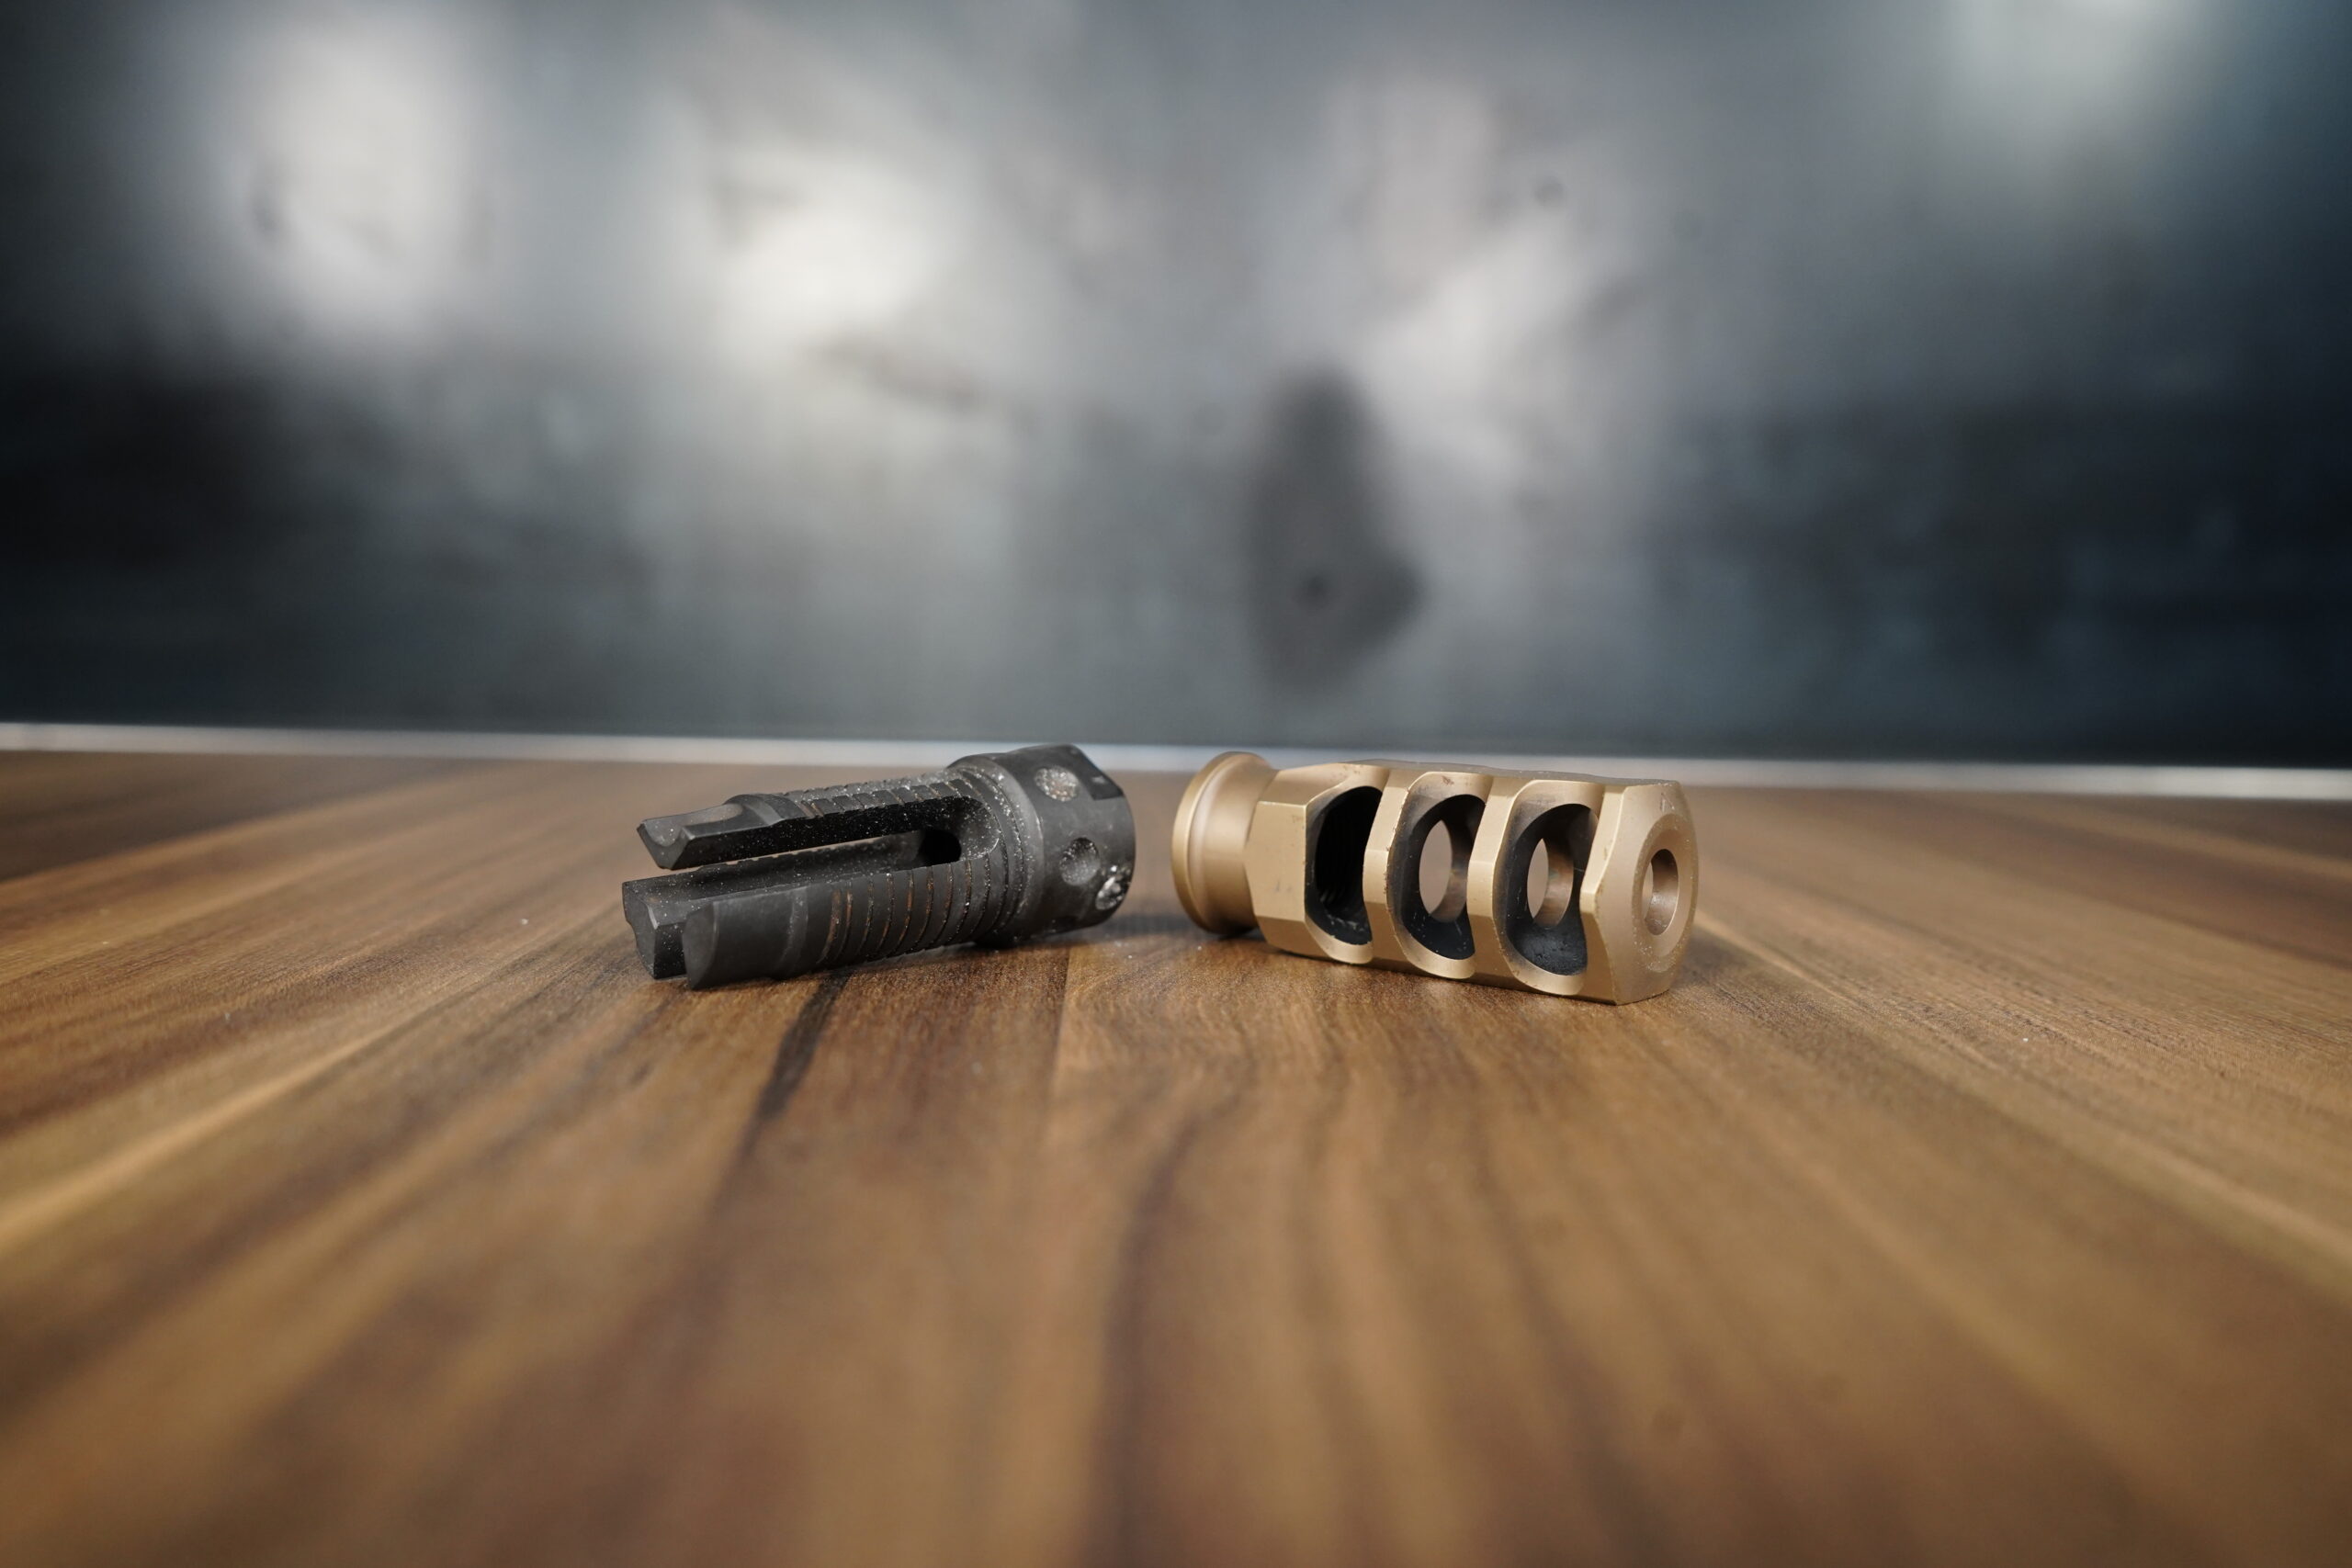 A photo of a flash hider and a muzzle brake